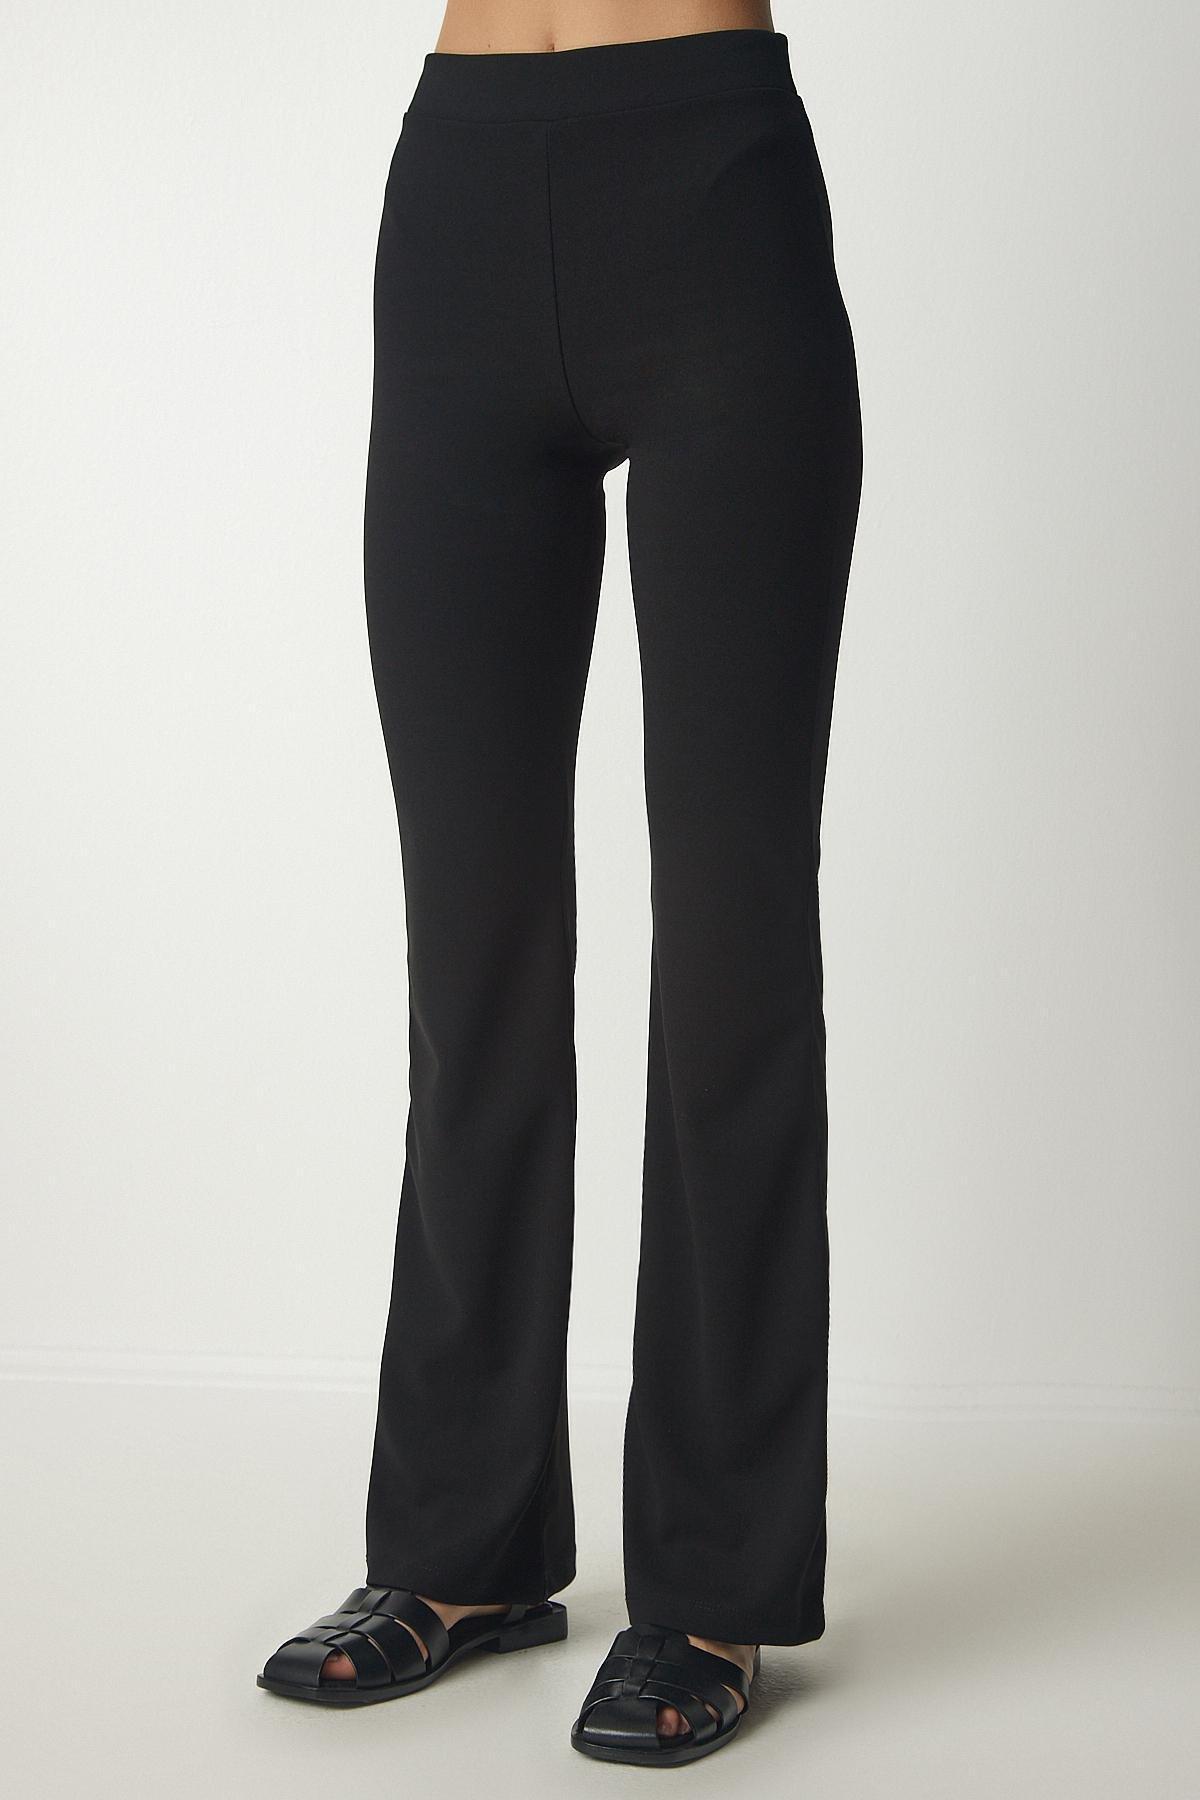 Happiness Istanbul - Black Cropped Leg Weave Trousers